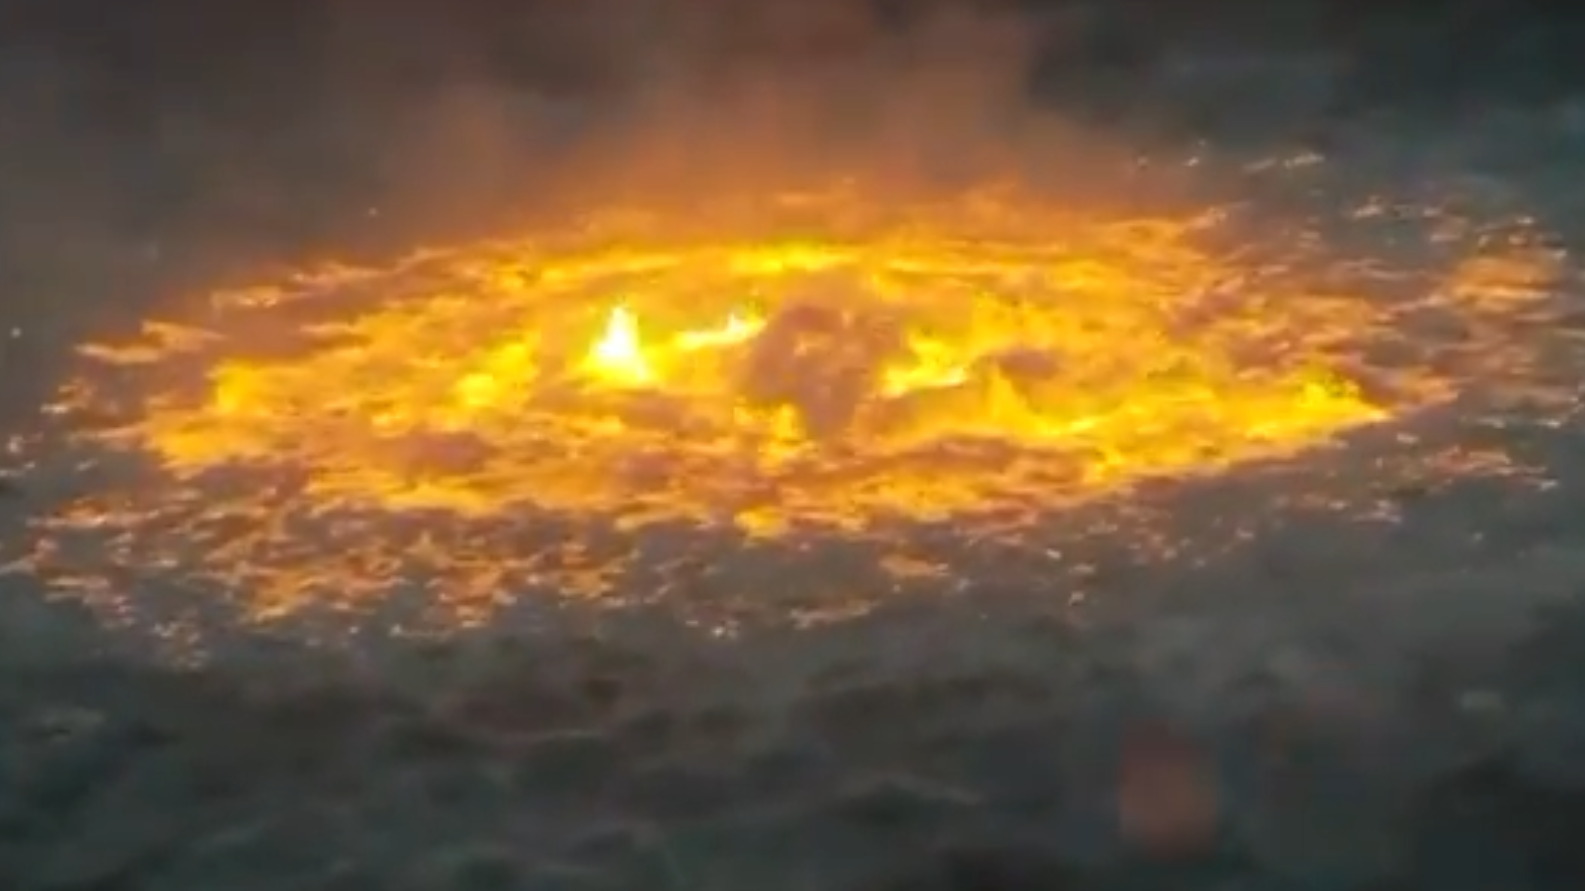 Fire erupts in Gulf of Mexico after undersea gas pipeline ruptures